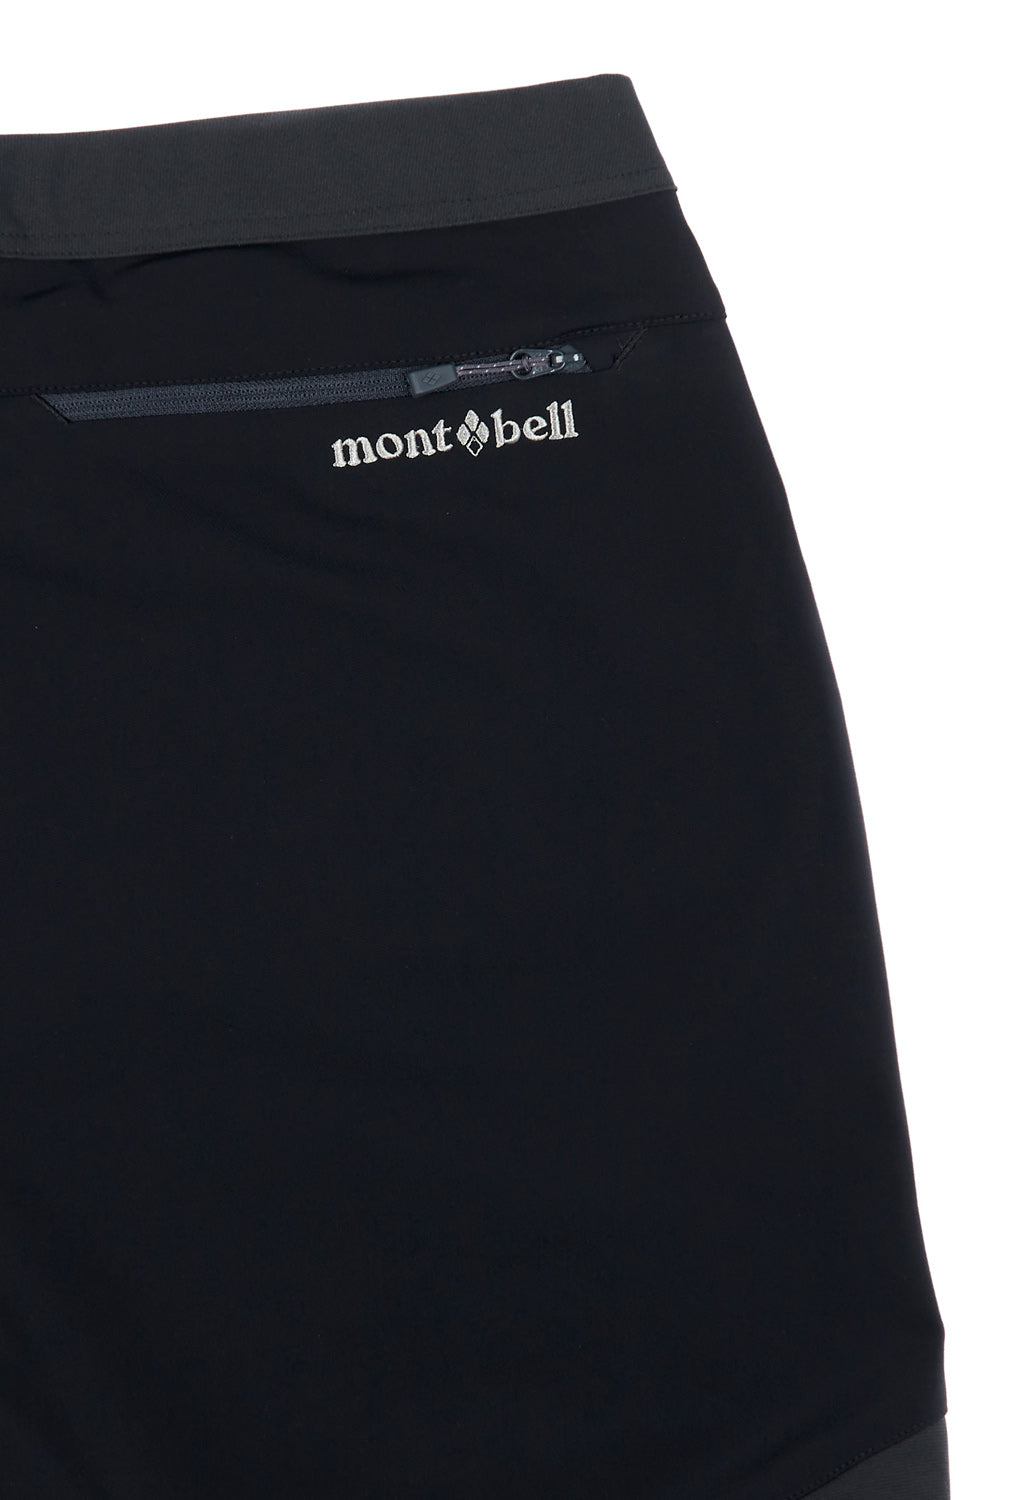 Montbell Men's Guide Pants - Dark Charcoal